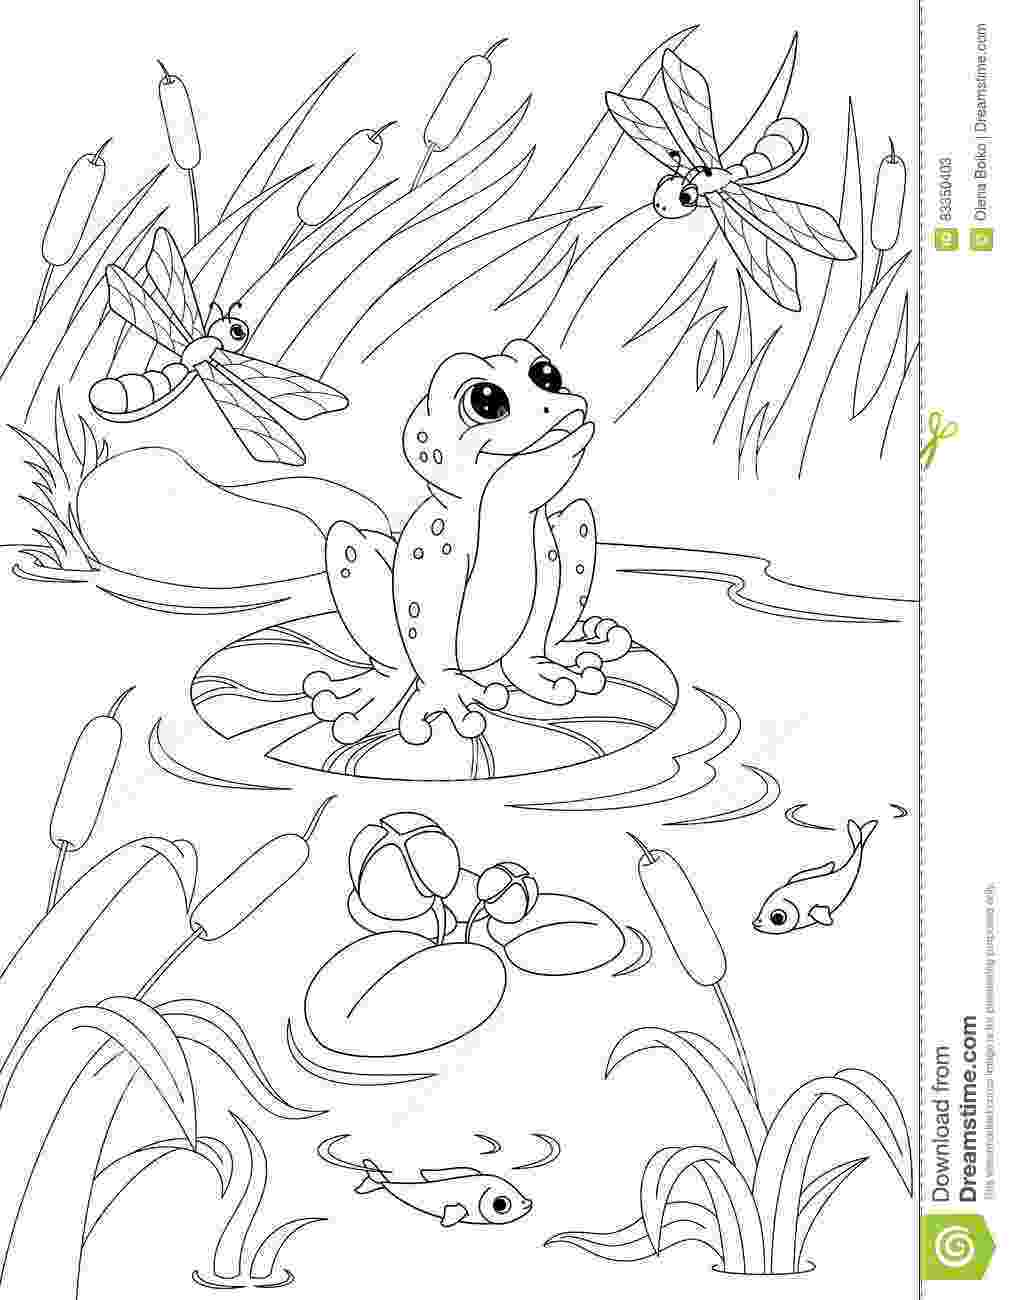 pond pictures to color coloring club from the pond to pond pictures color 